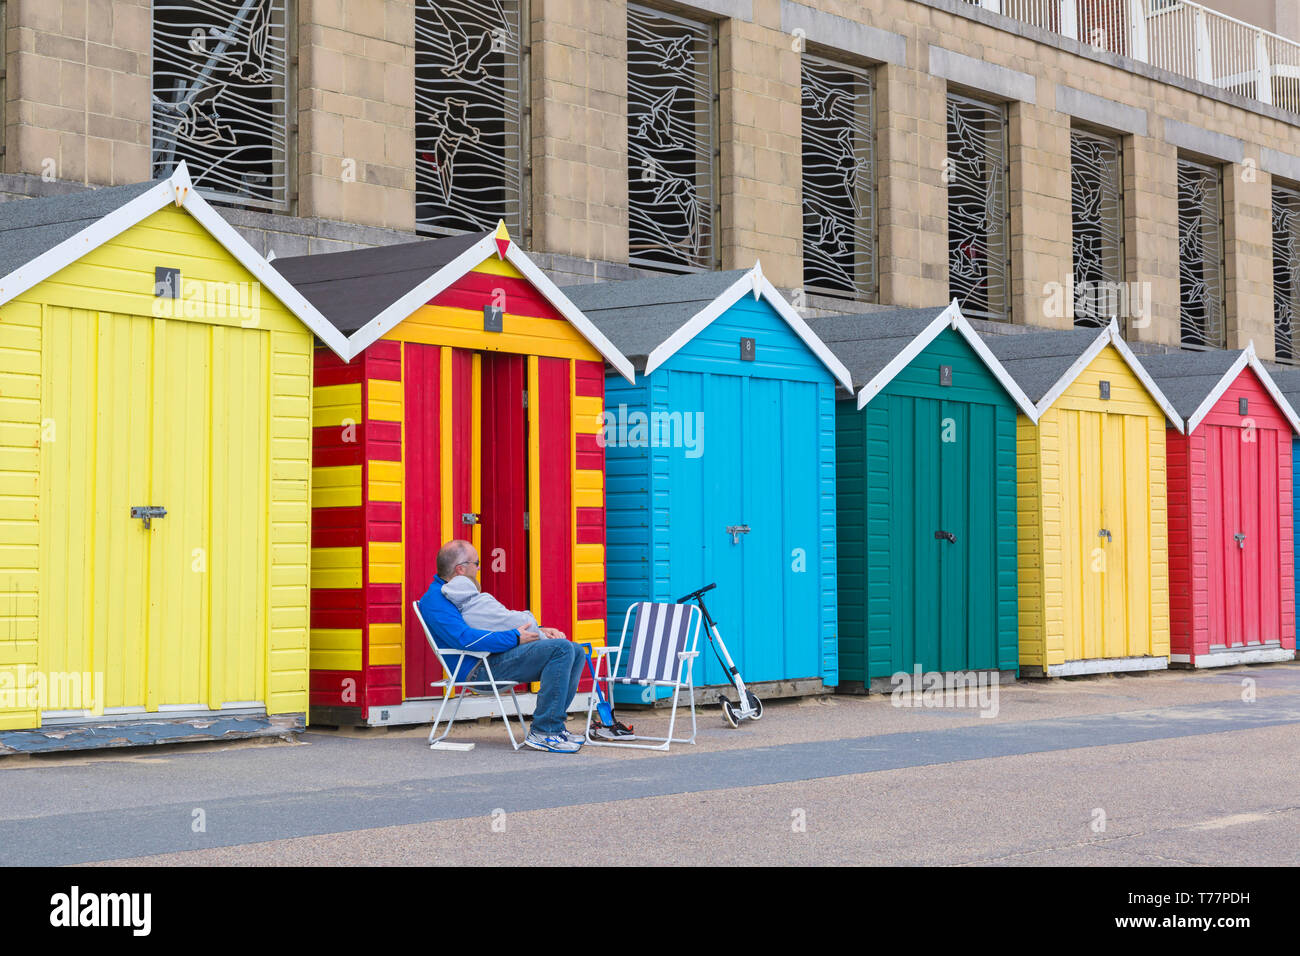 Boscombe, Bournemouth, Dorset, UK. 5th May 2019. UK weather: cold cloudy afternoon at Boscombe, Bournemouth.   Credit: Carolyn Jenkins/Alamy Live News Stock Photo